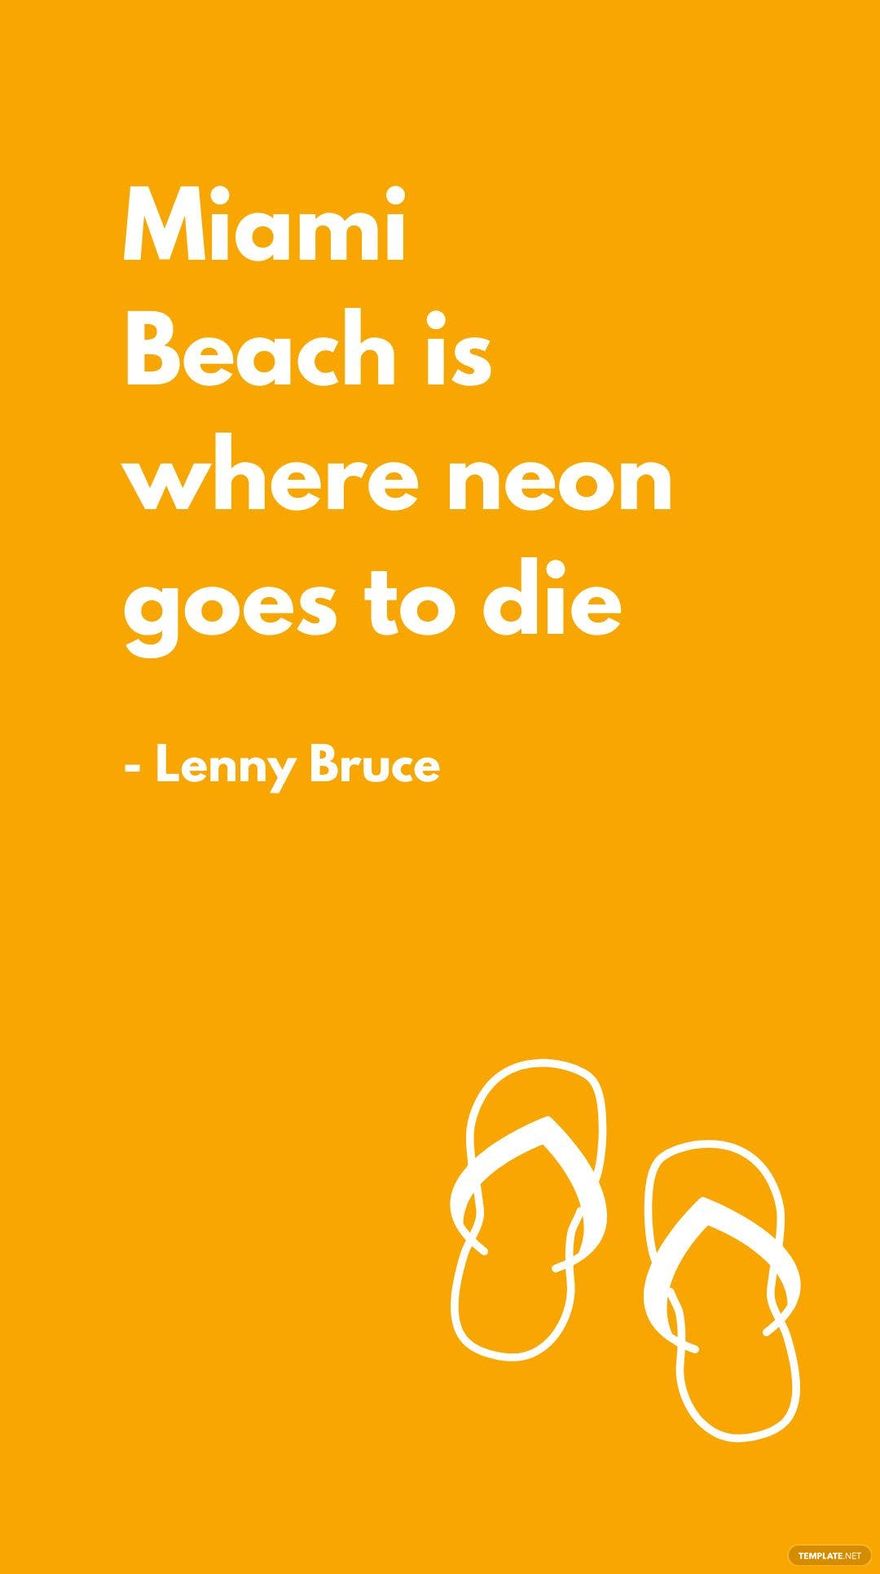 Free Lenny Bruce - Miami Beach is where neon goes to die in JPG